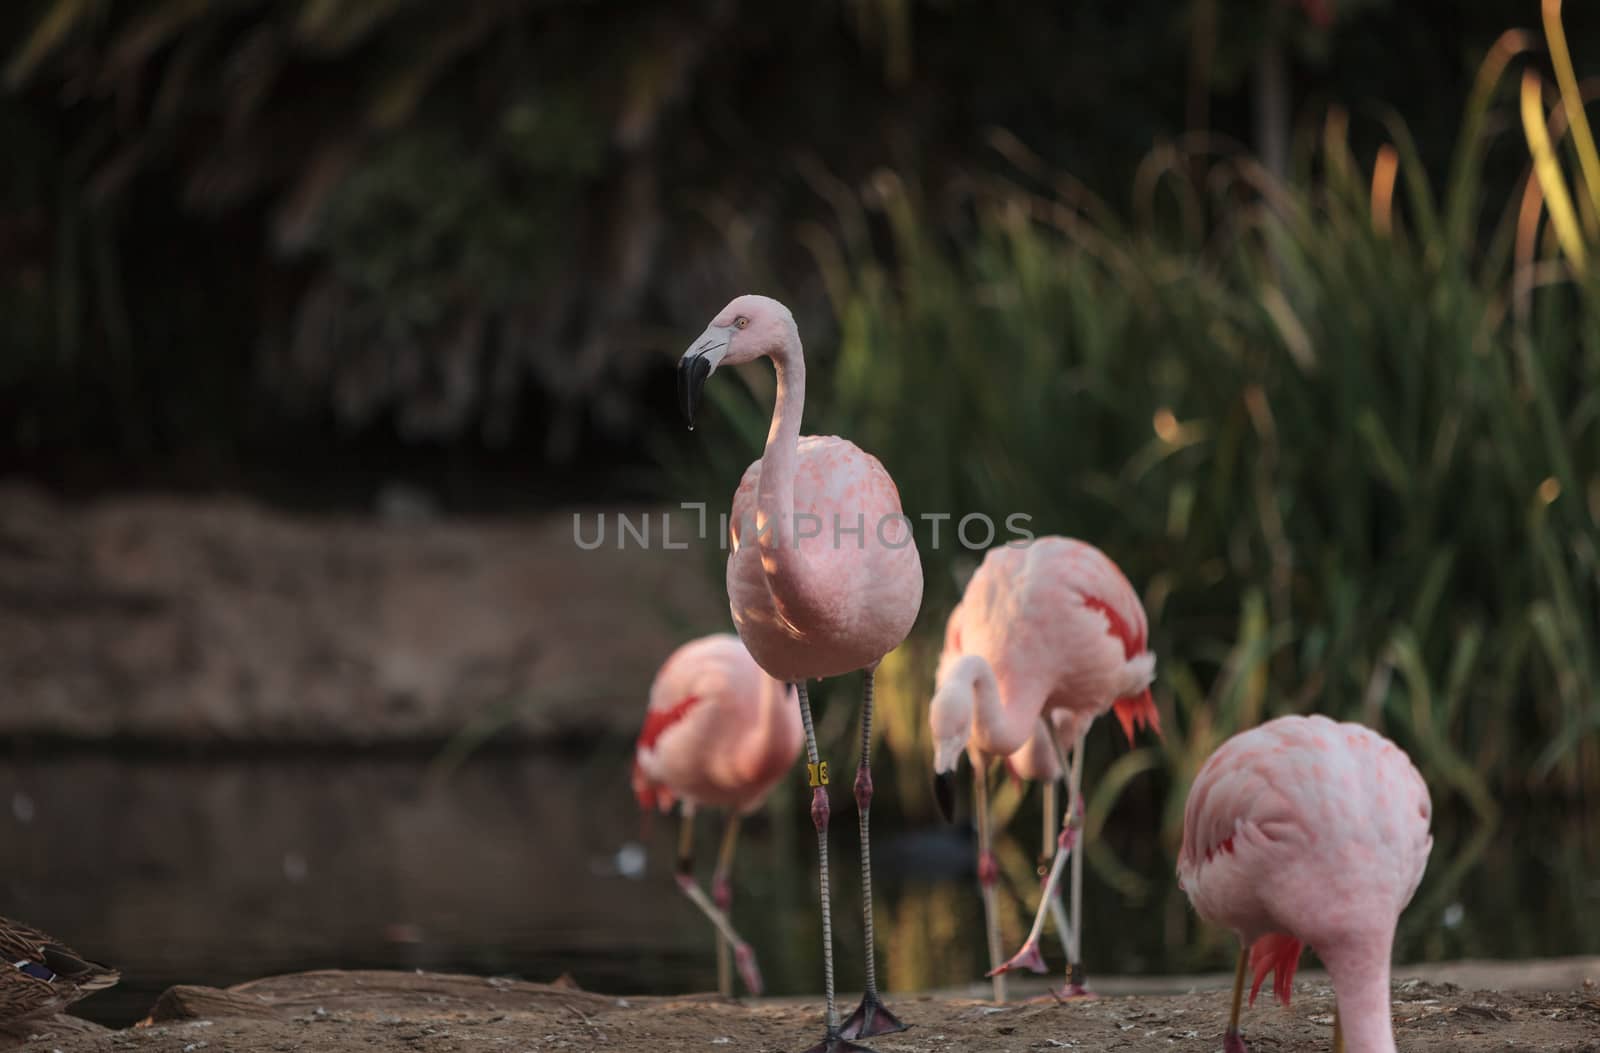 The Chilean flamingo, Phoenicopterus chilensis, is bright pink freshwater bird.